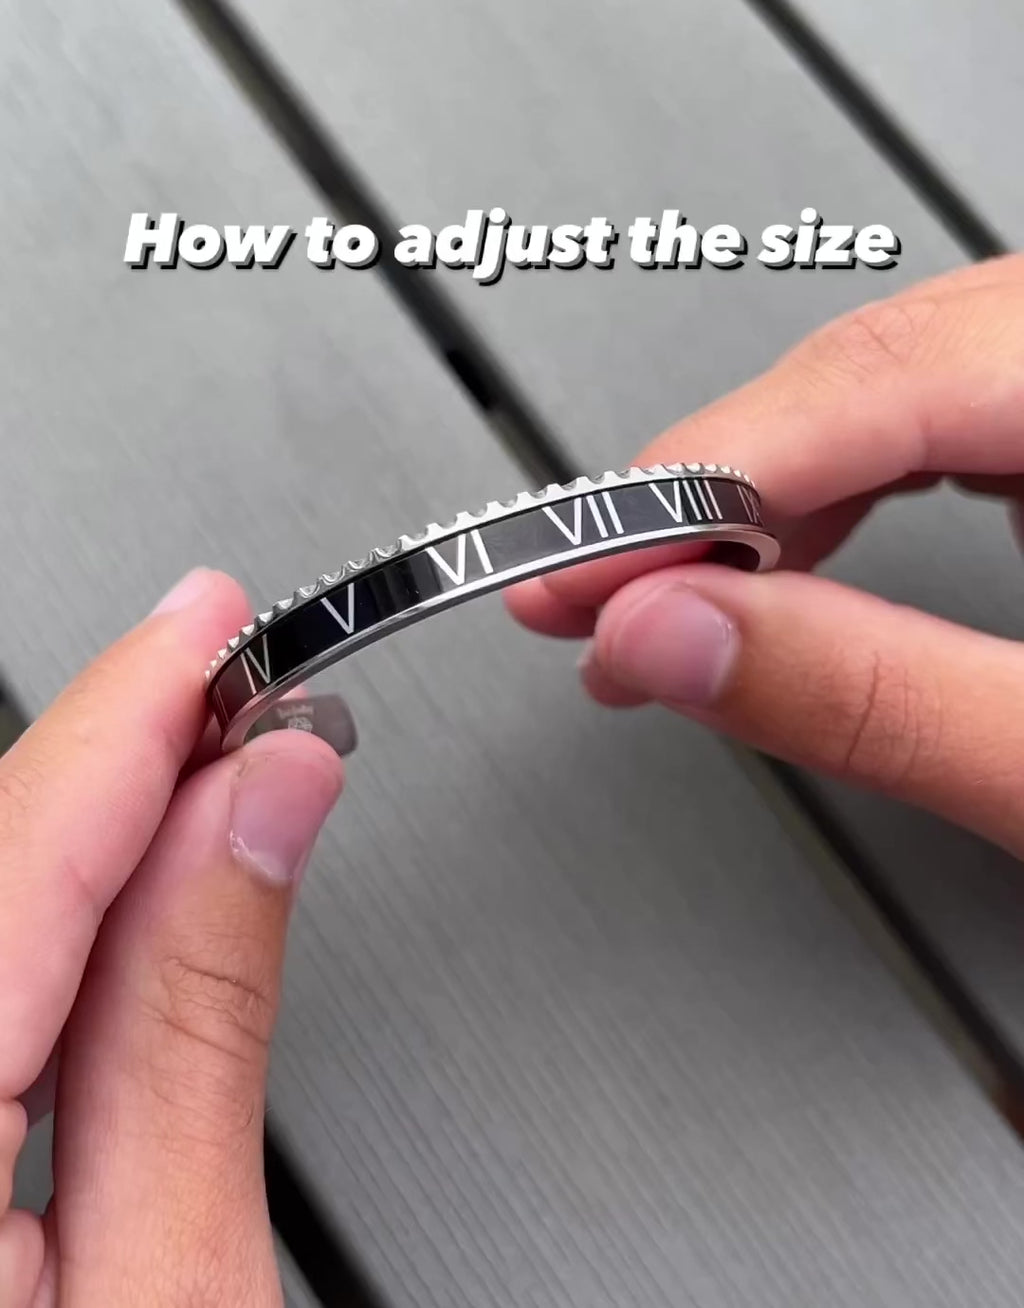 Video showing how to put on the Emils Jewellery Roman Speed bracelet